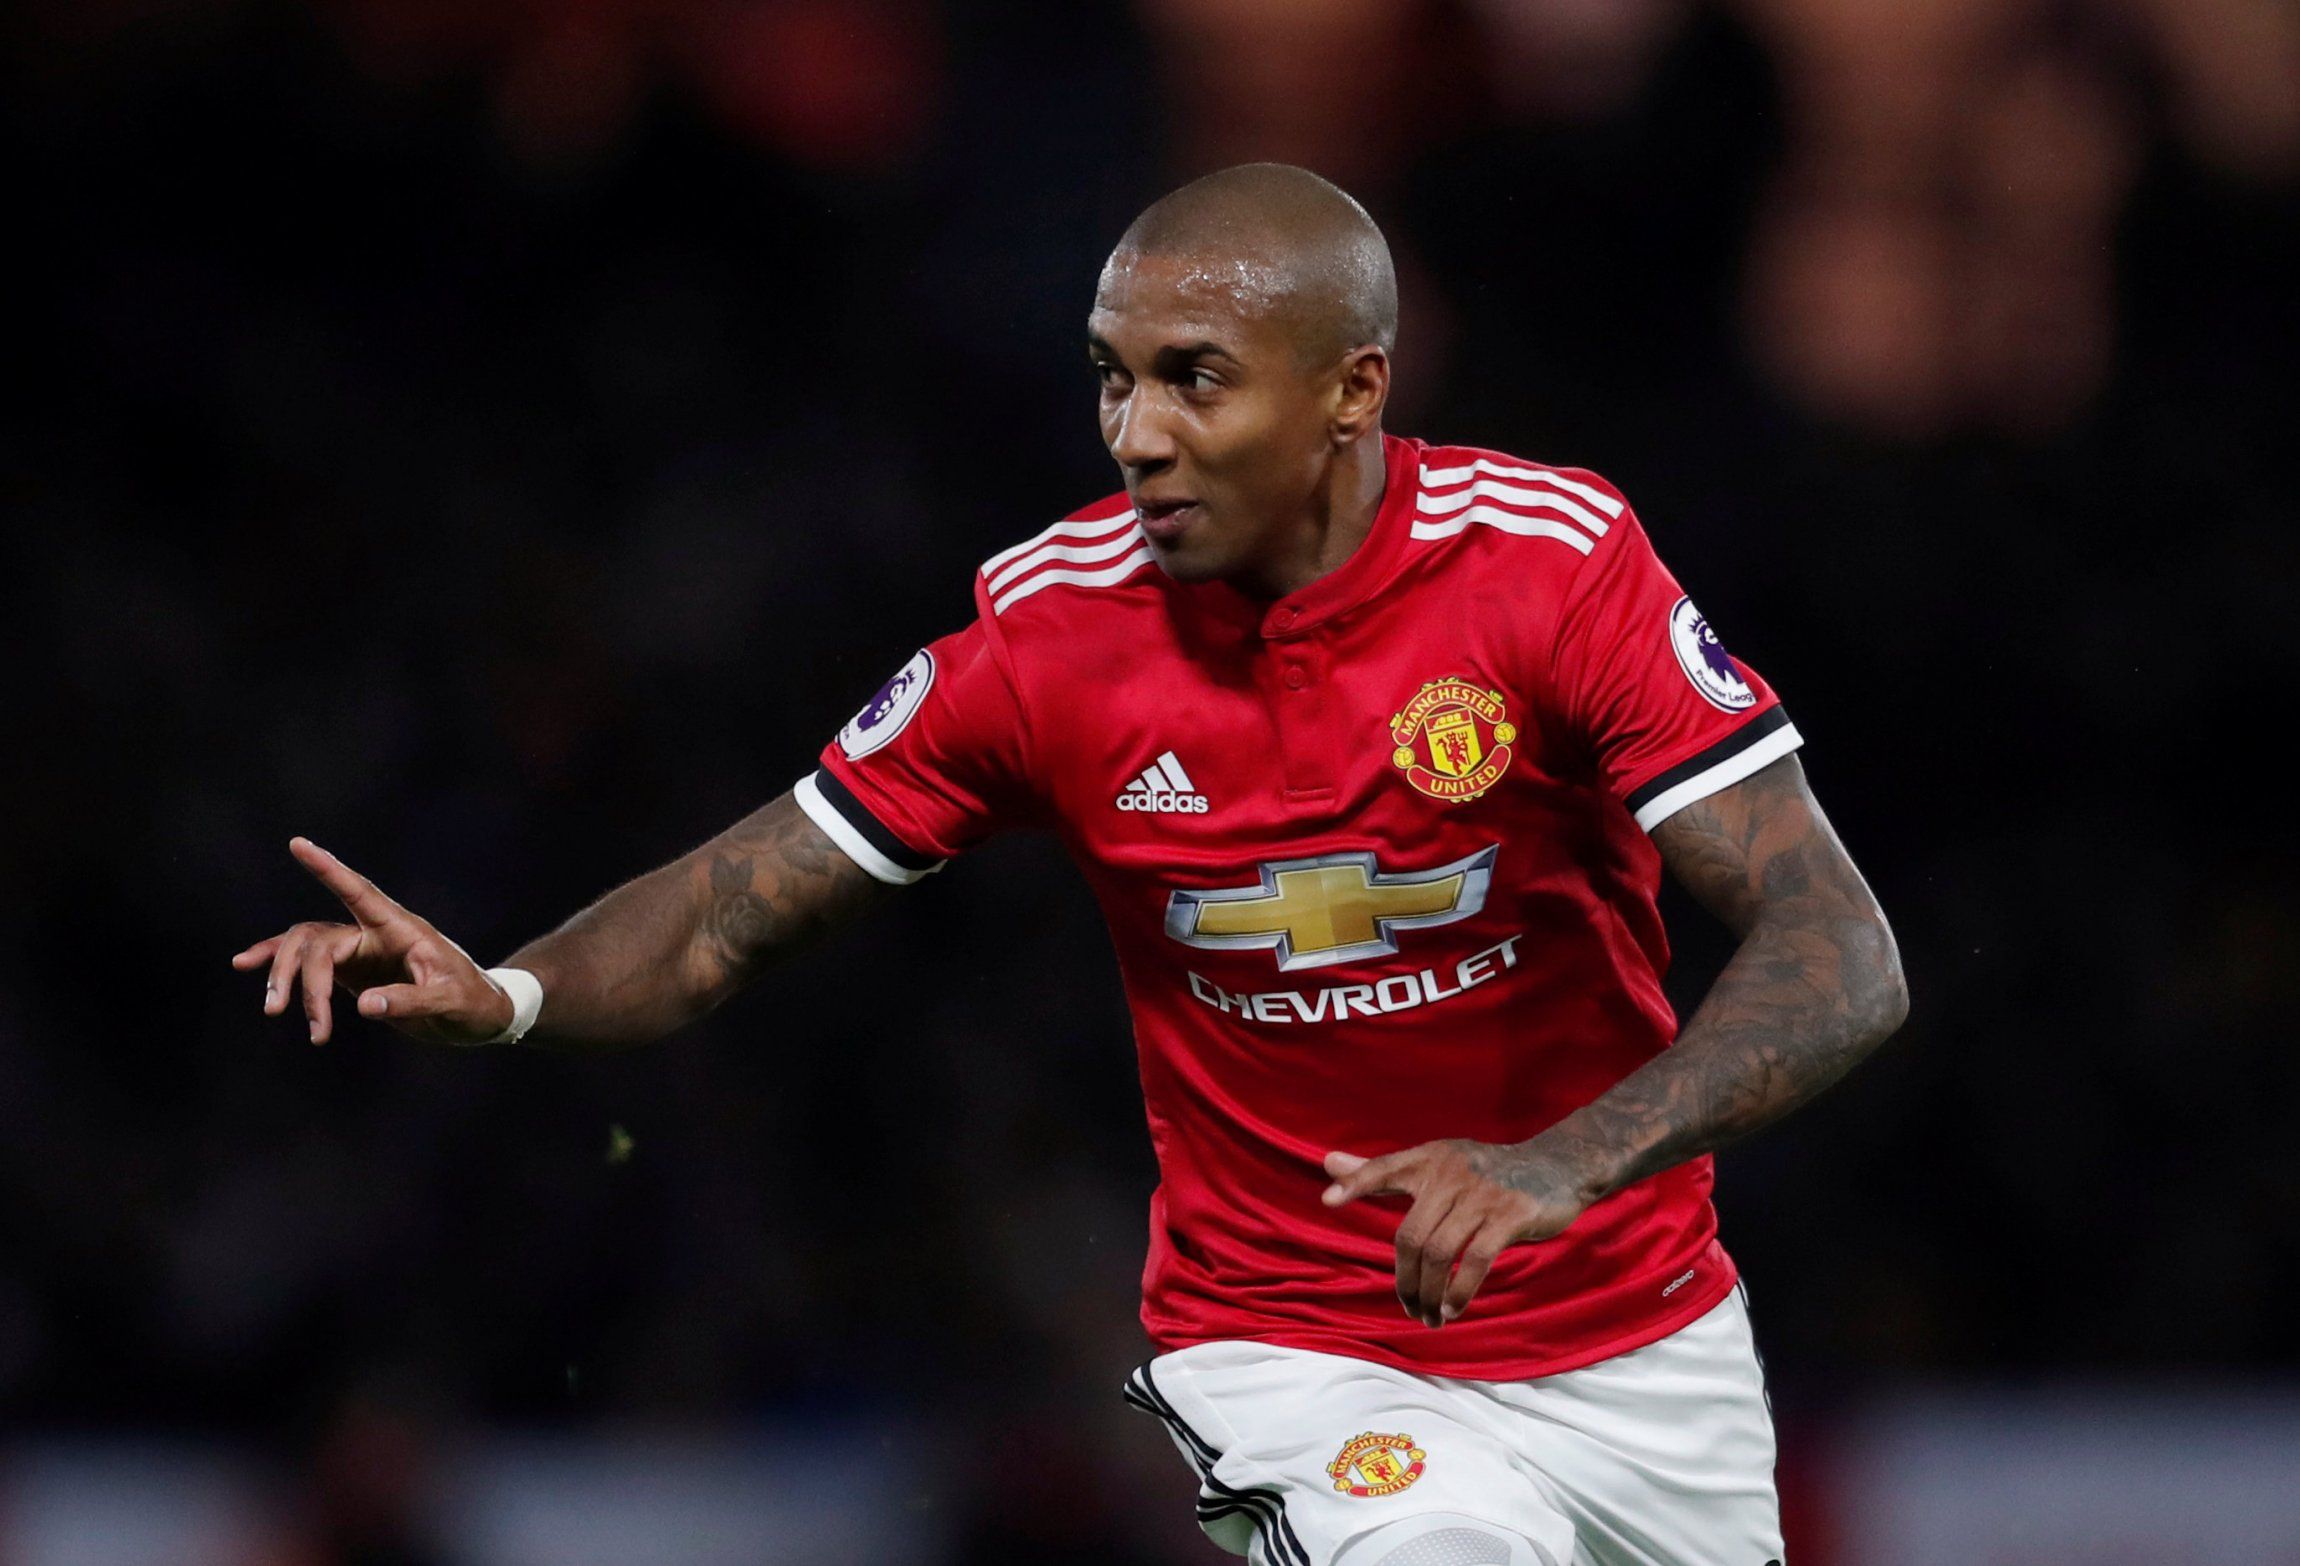 Ashley Young celebrates scoring a goal for Manchester United